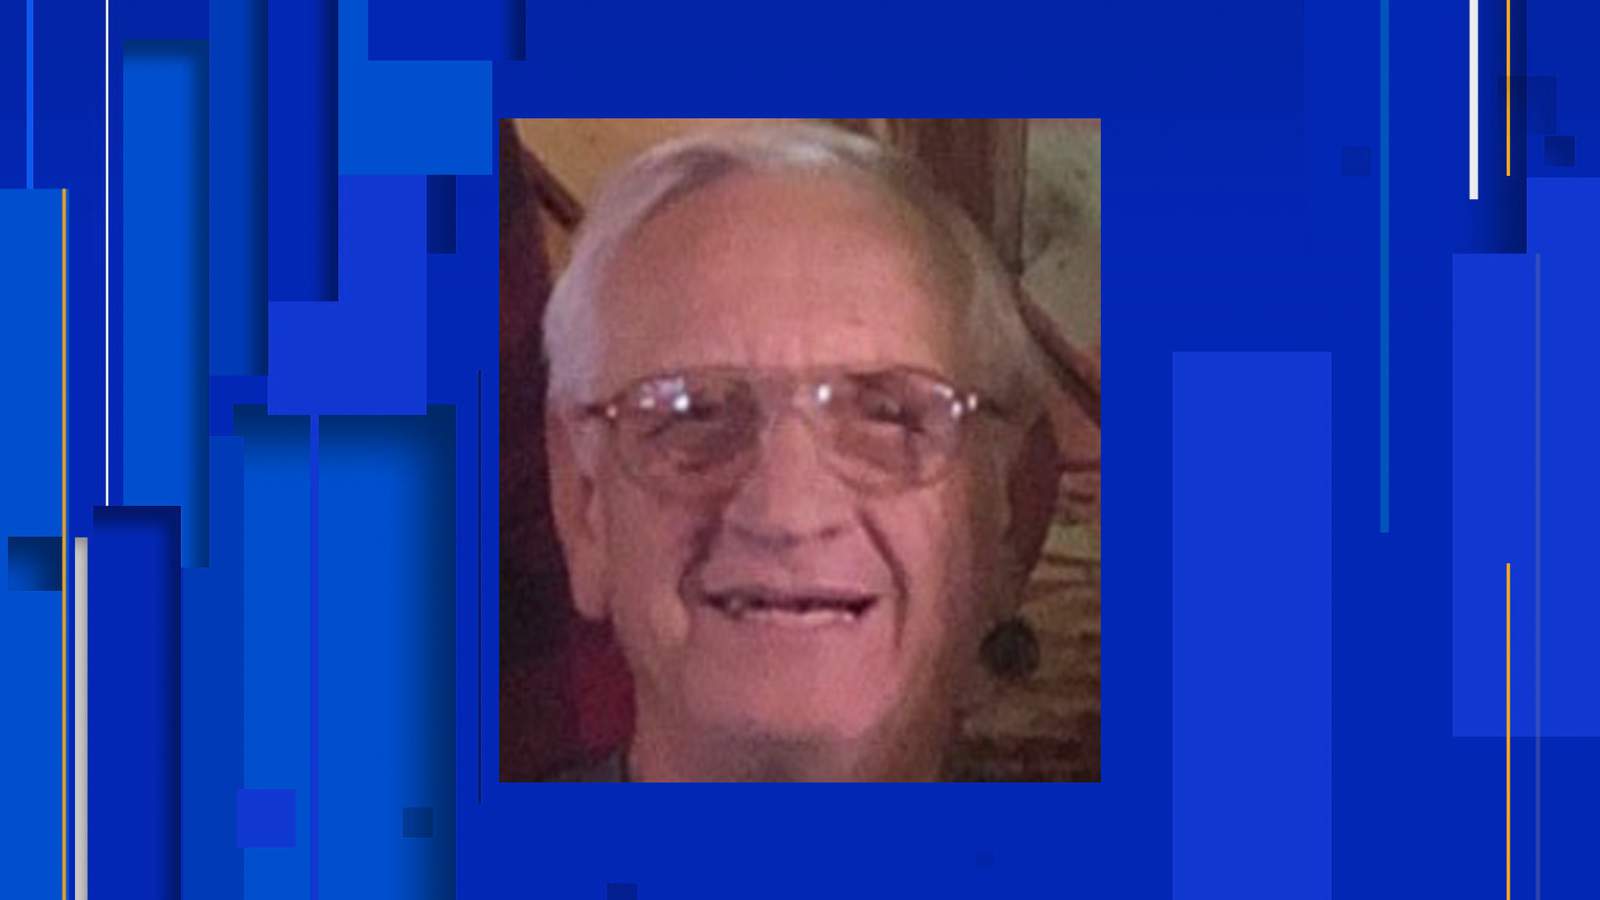 Silver Alert issued for missing 76-year-old man in Hays County